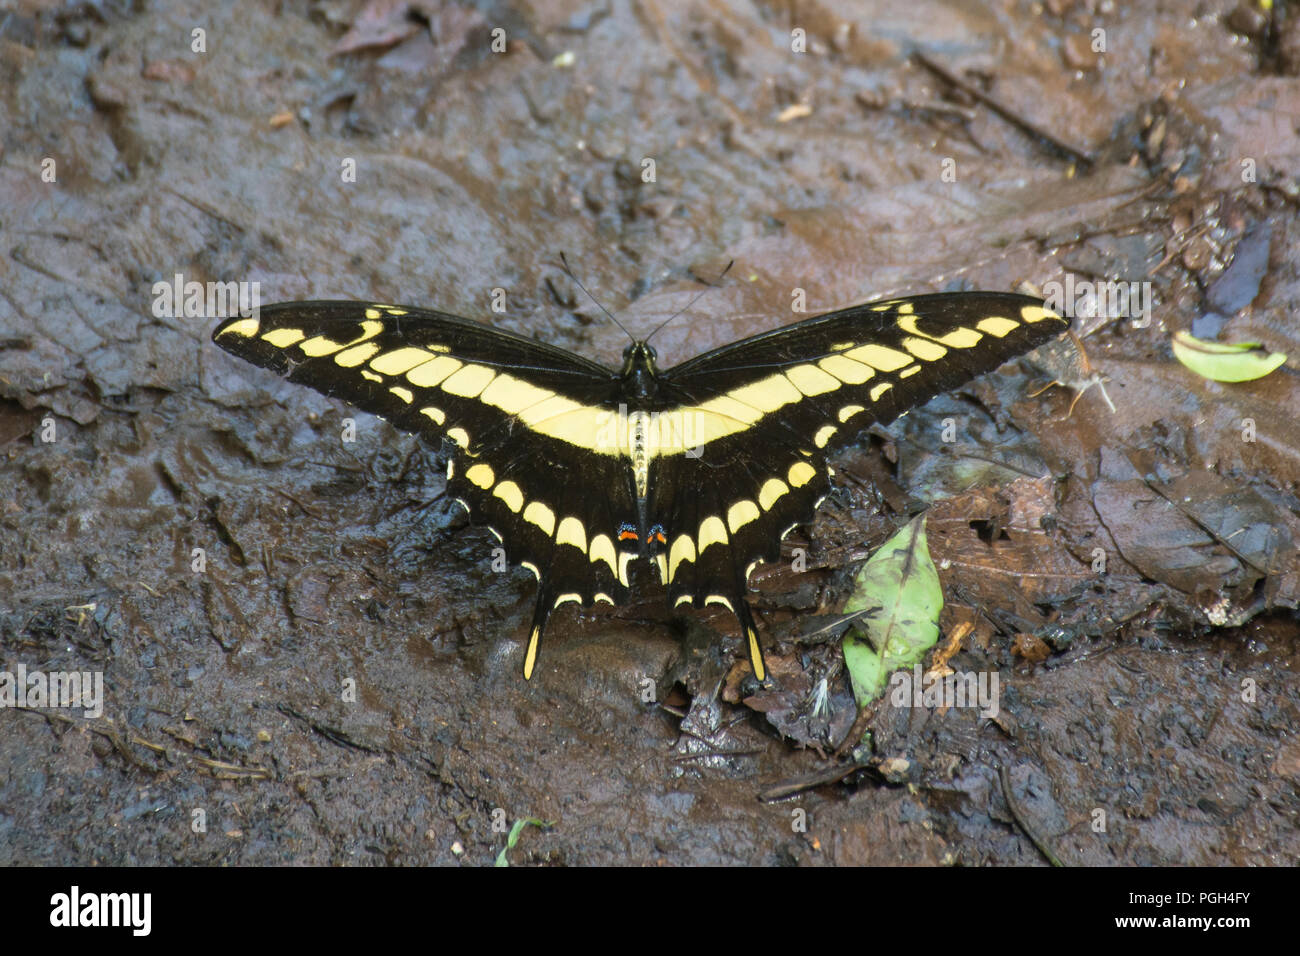 King Swallowtail butterfly (Papilio Thoas), Iguazu National Park, Misiones, Argentina, South America Stock Photo